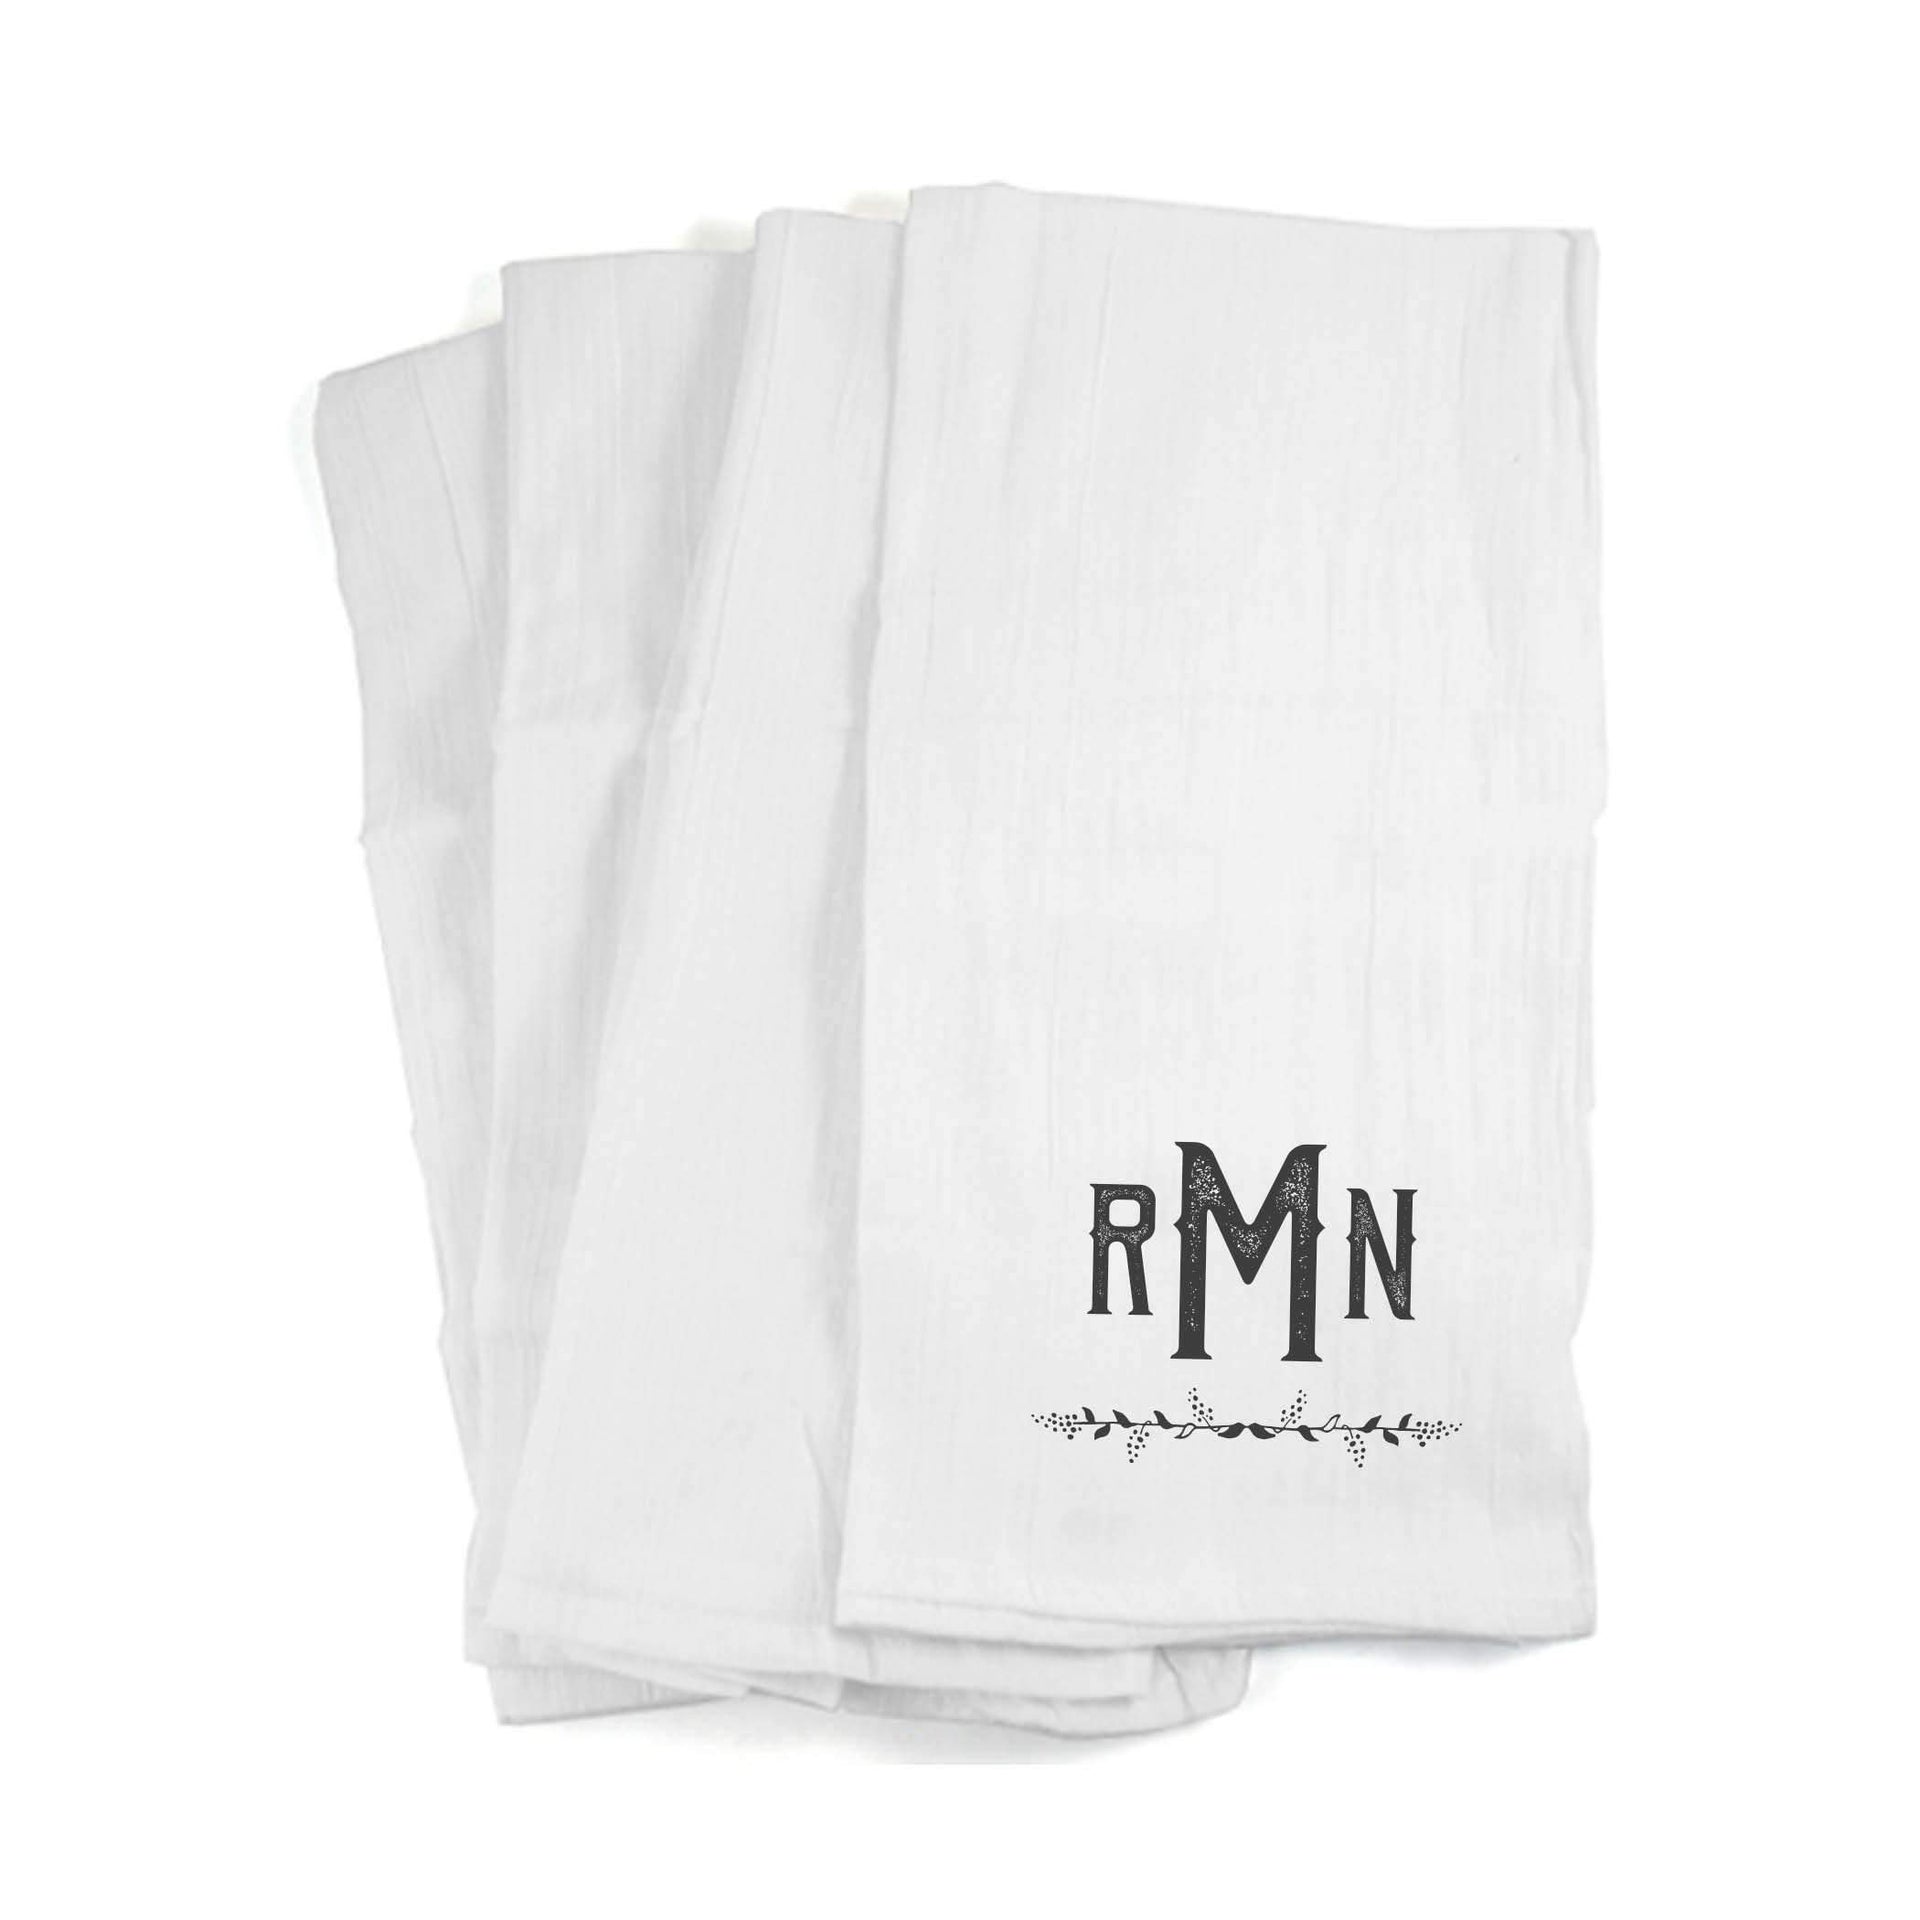 Custom printed kitchen towels with your monogram 3 letter initials.